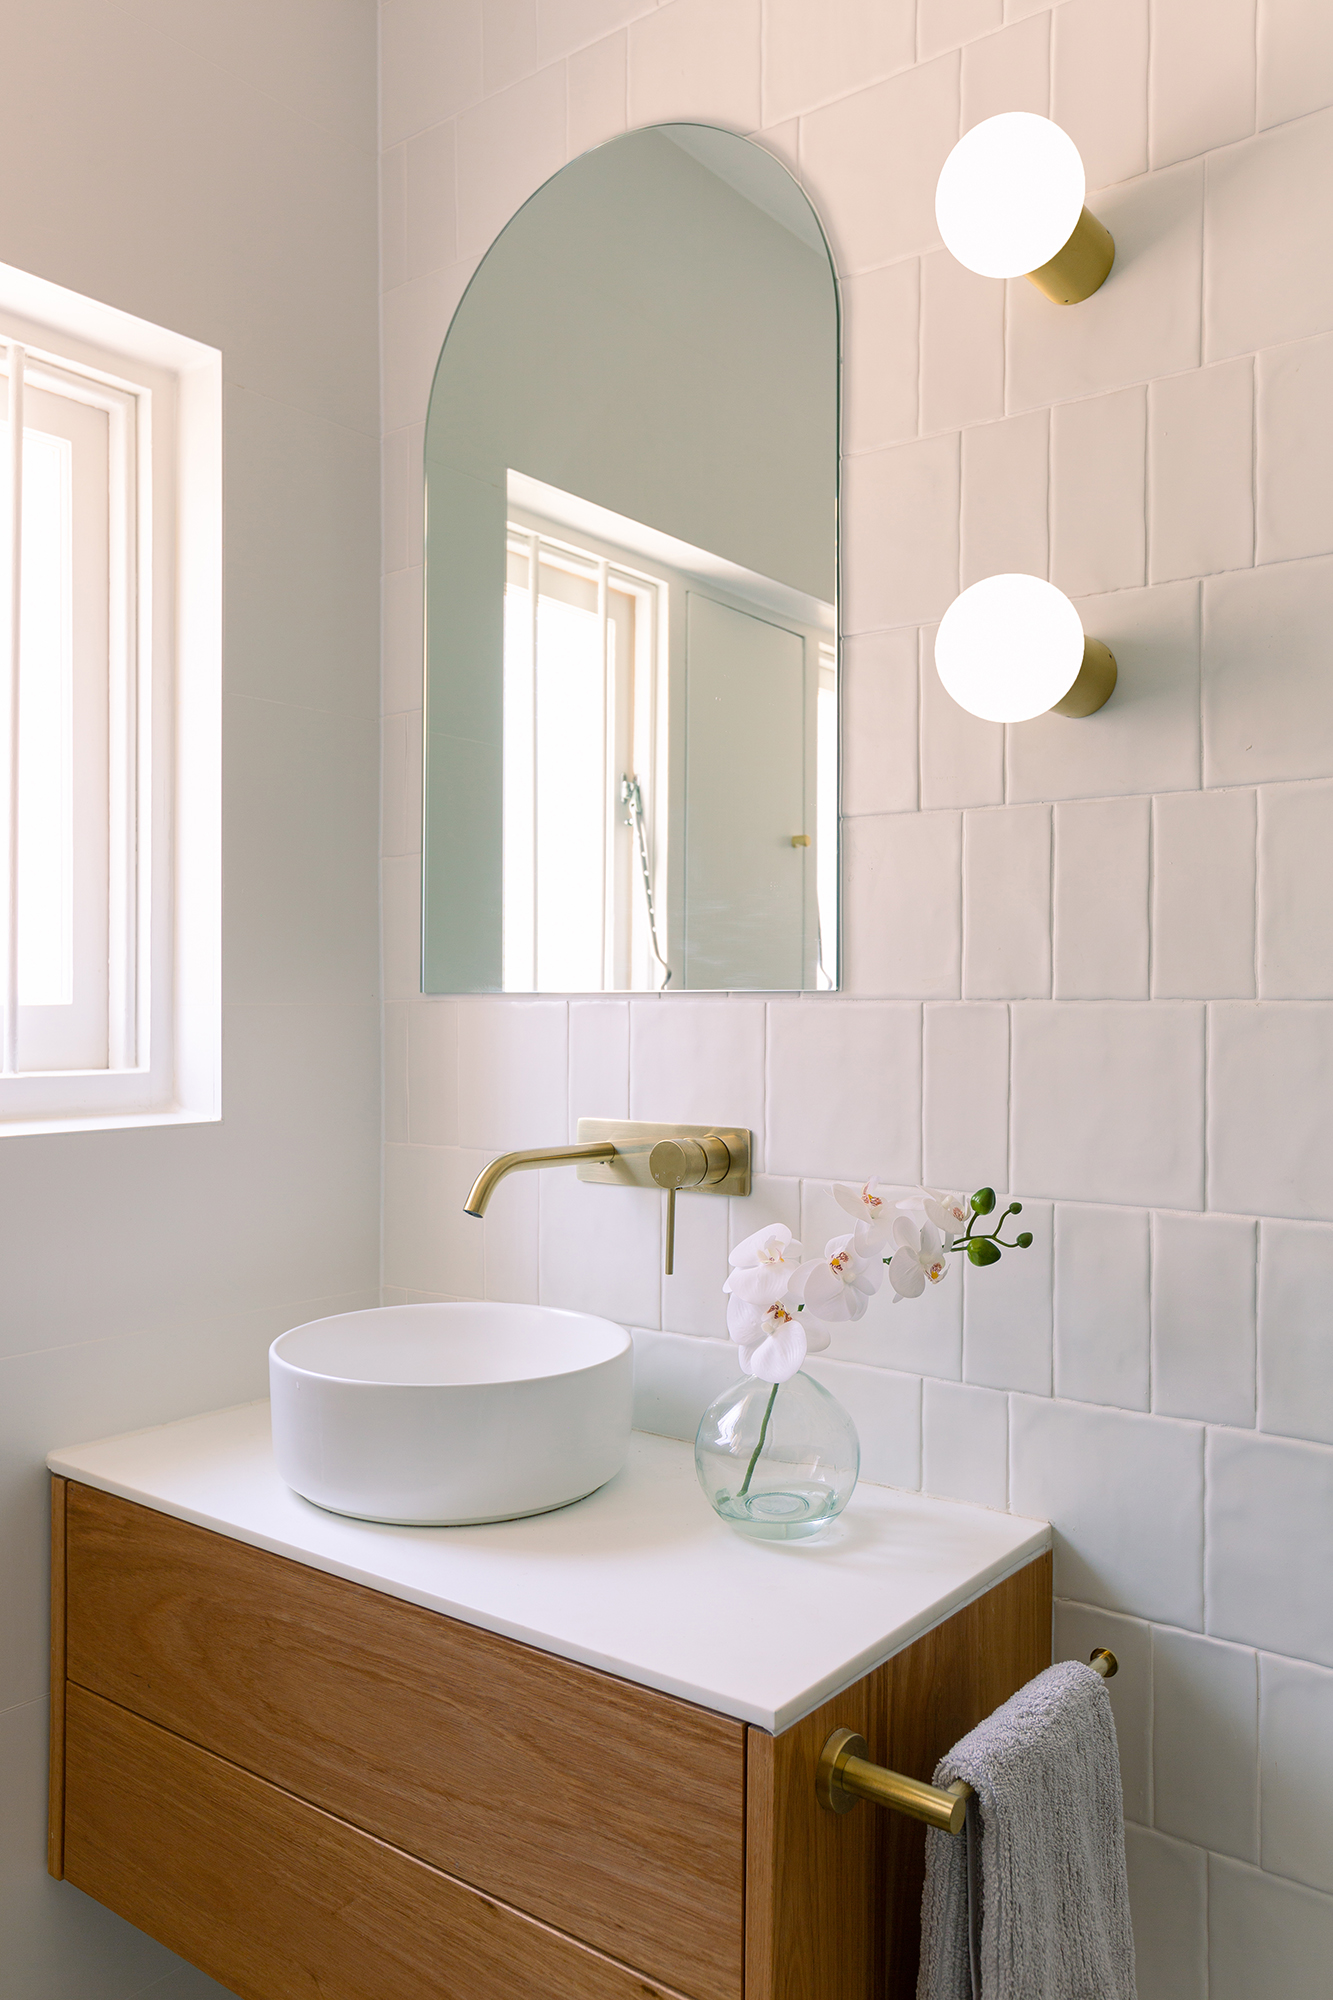 Creating a Cohesive Bathroom Design with Matching Fixtures